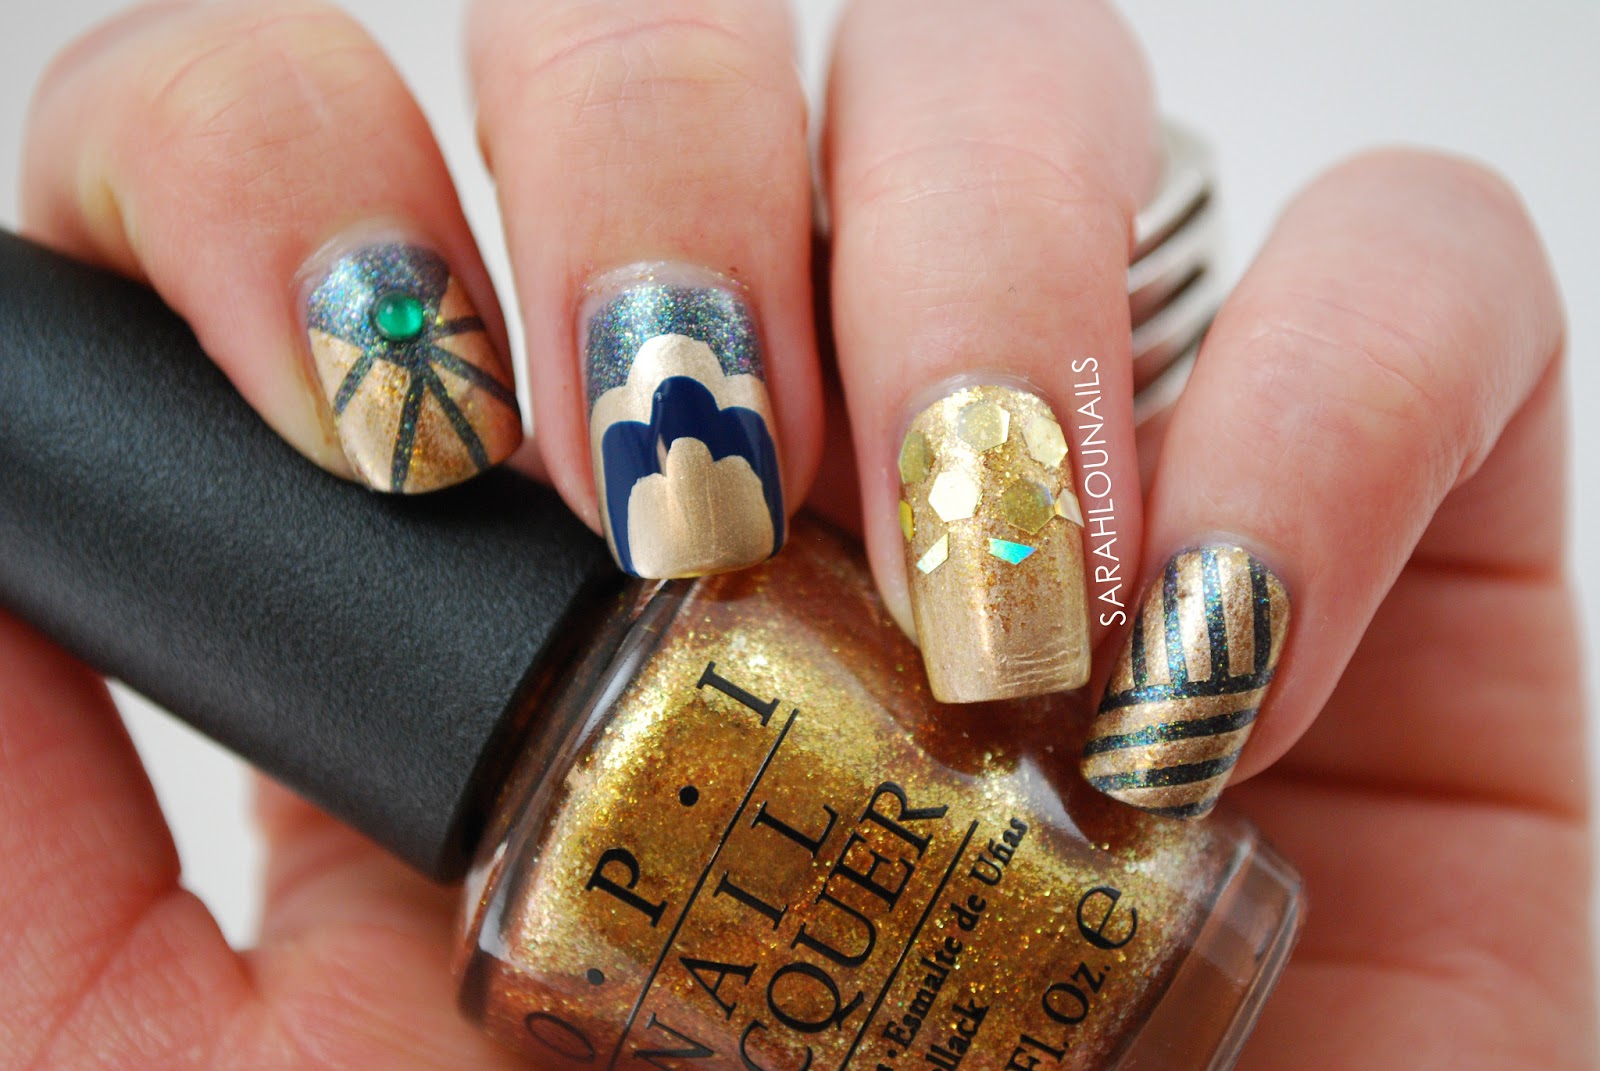 3. "Art Deco Nail Designs for the Great Gatsby Lover" - wide 1